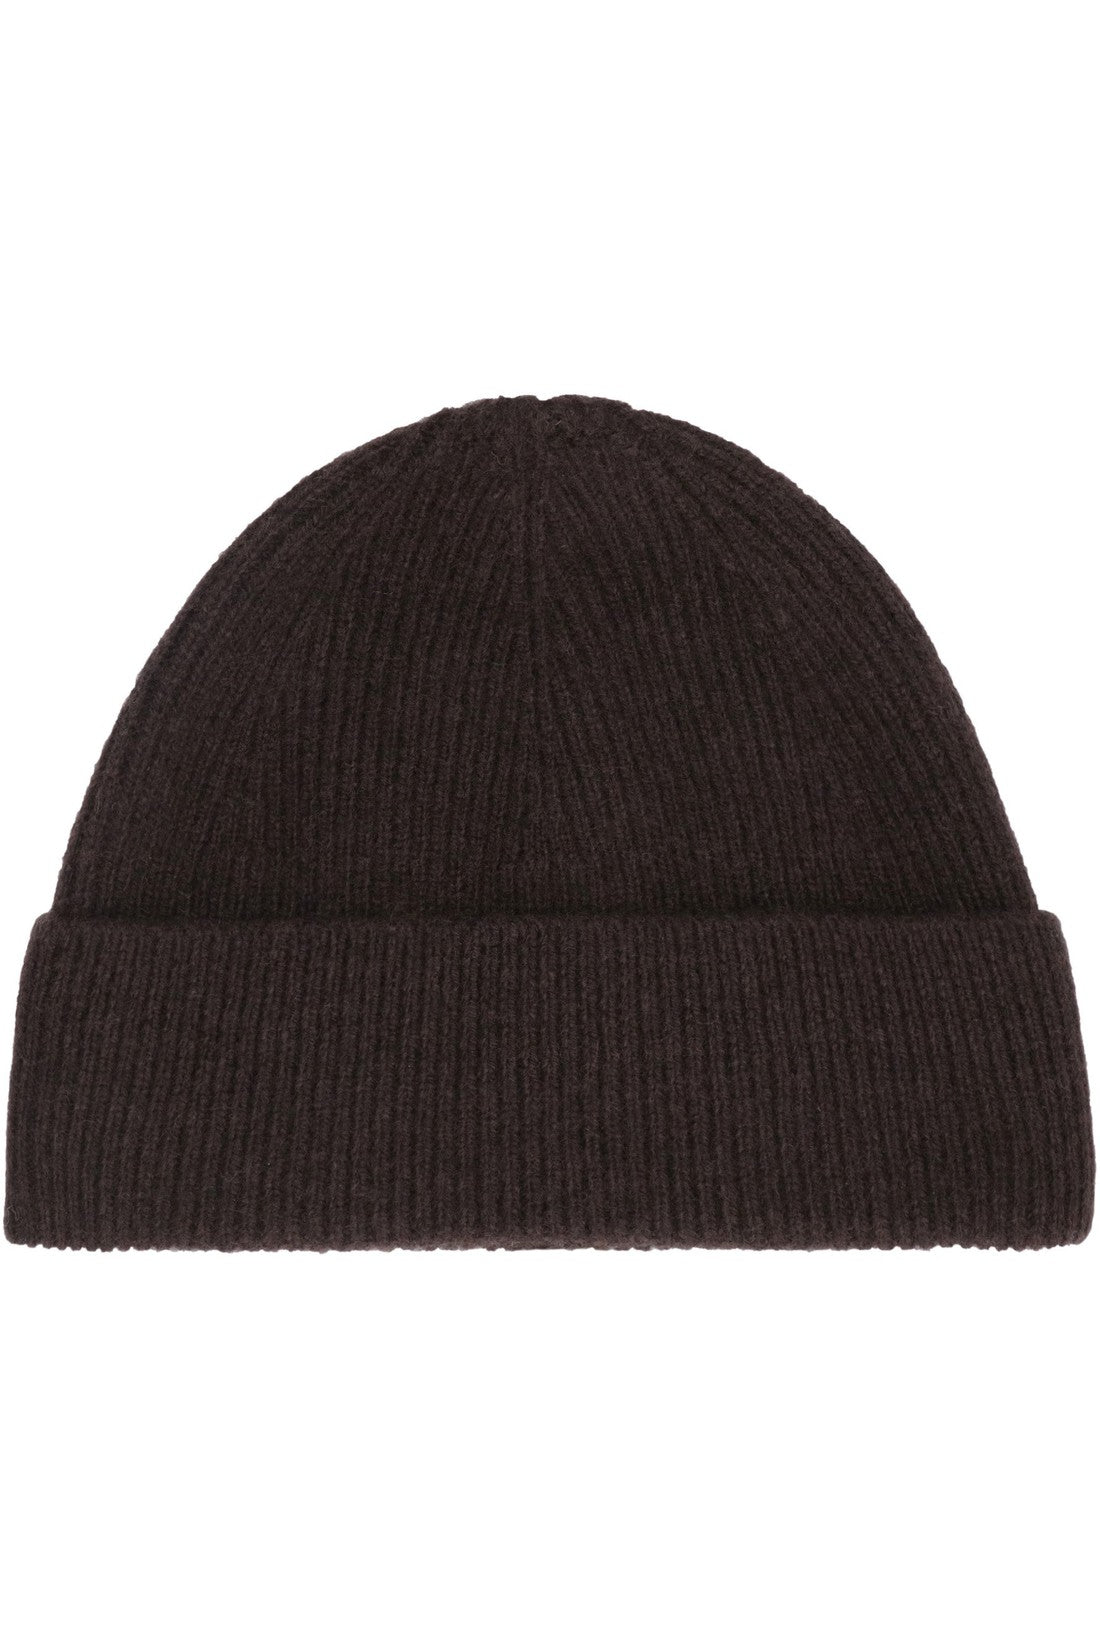 Acne Studios-OUTLET-SALE-Wool and cashmere hat-ARCHIVIST